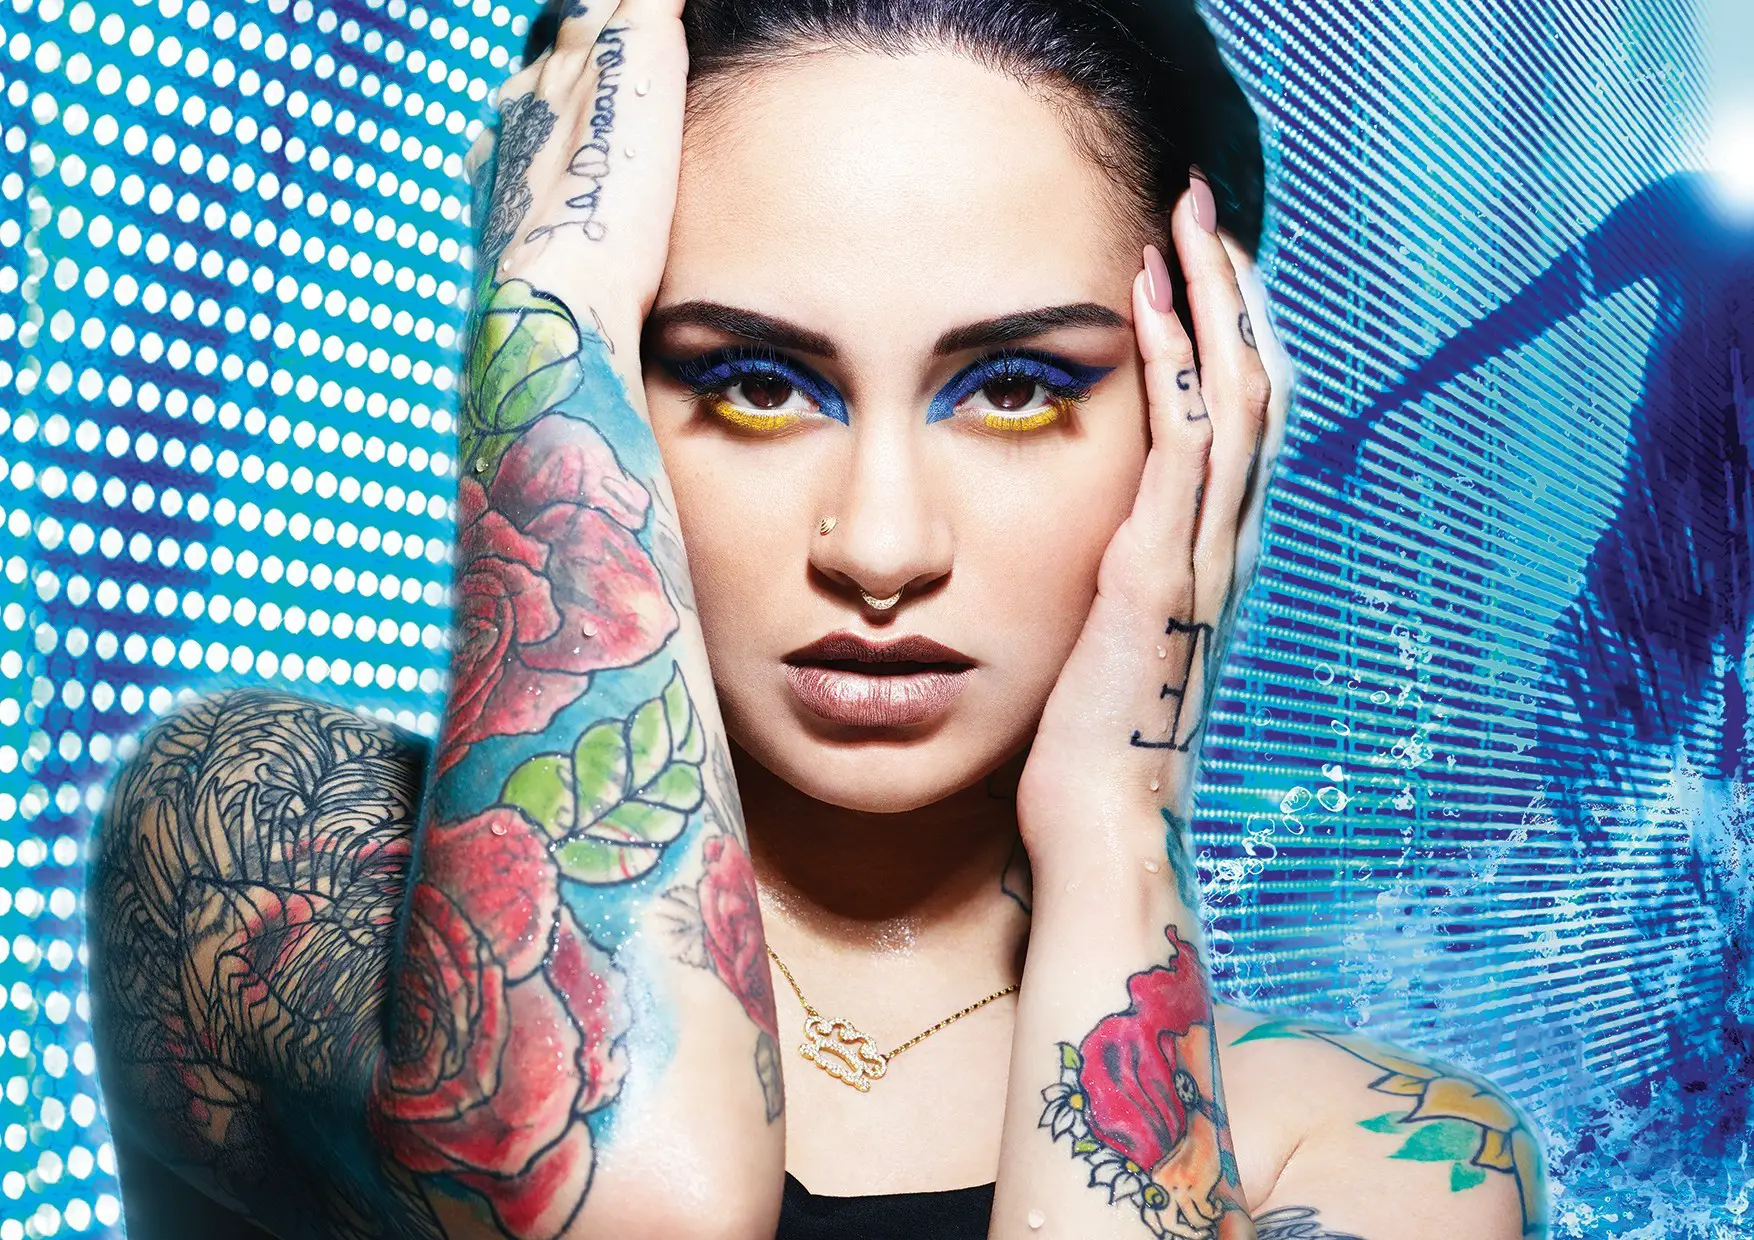 MAKE UP FOR EVER AND KEHLANI LAUNCH AQUA XL COLOR COLLECTIONS